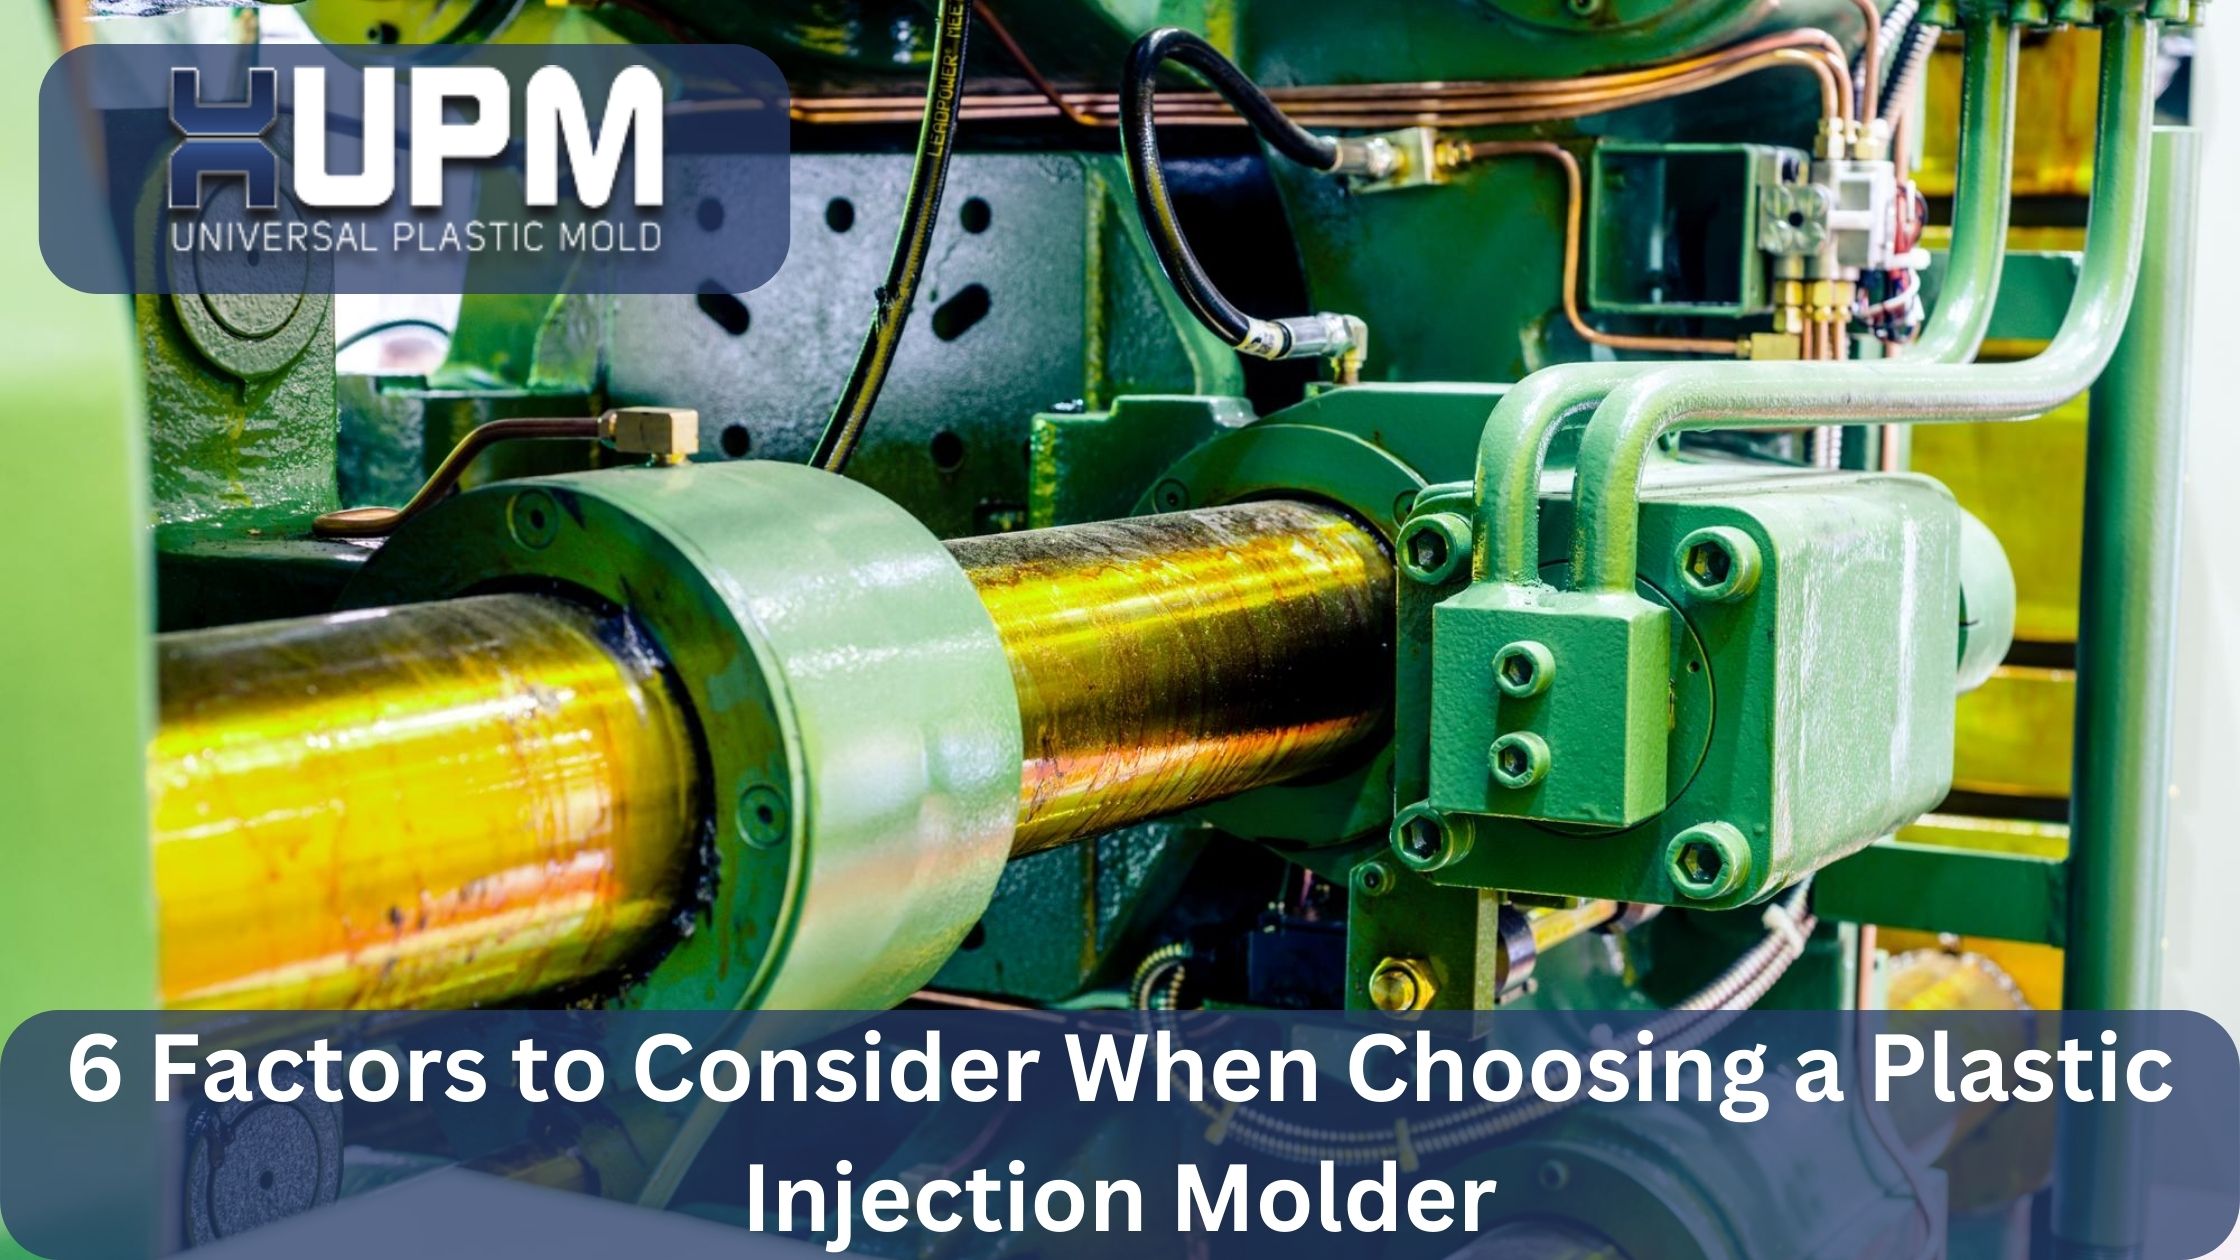 6 Factors to Consider When Choosing a Plastic Injection Molder